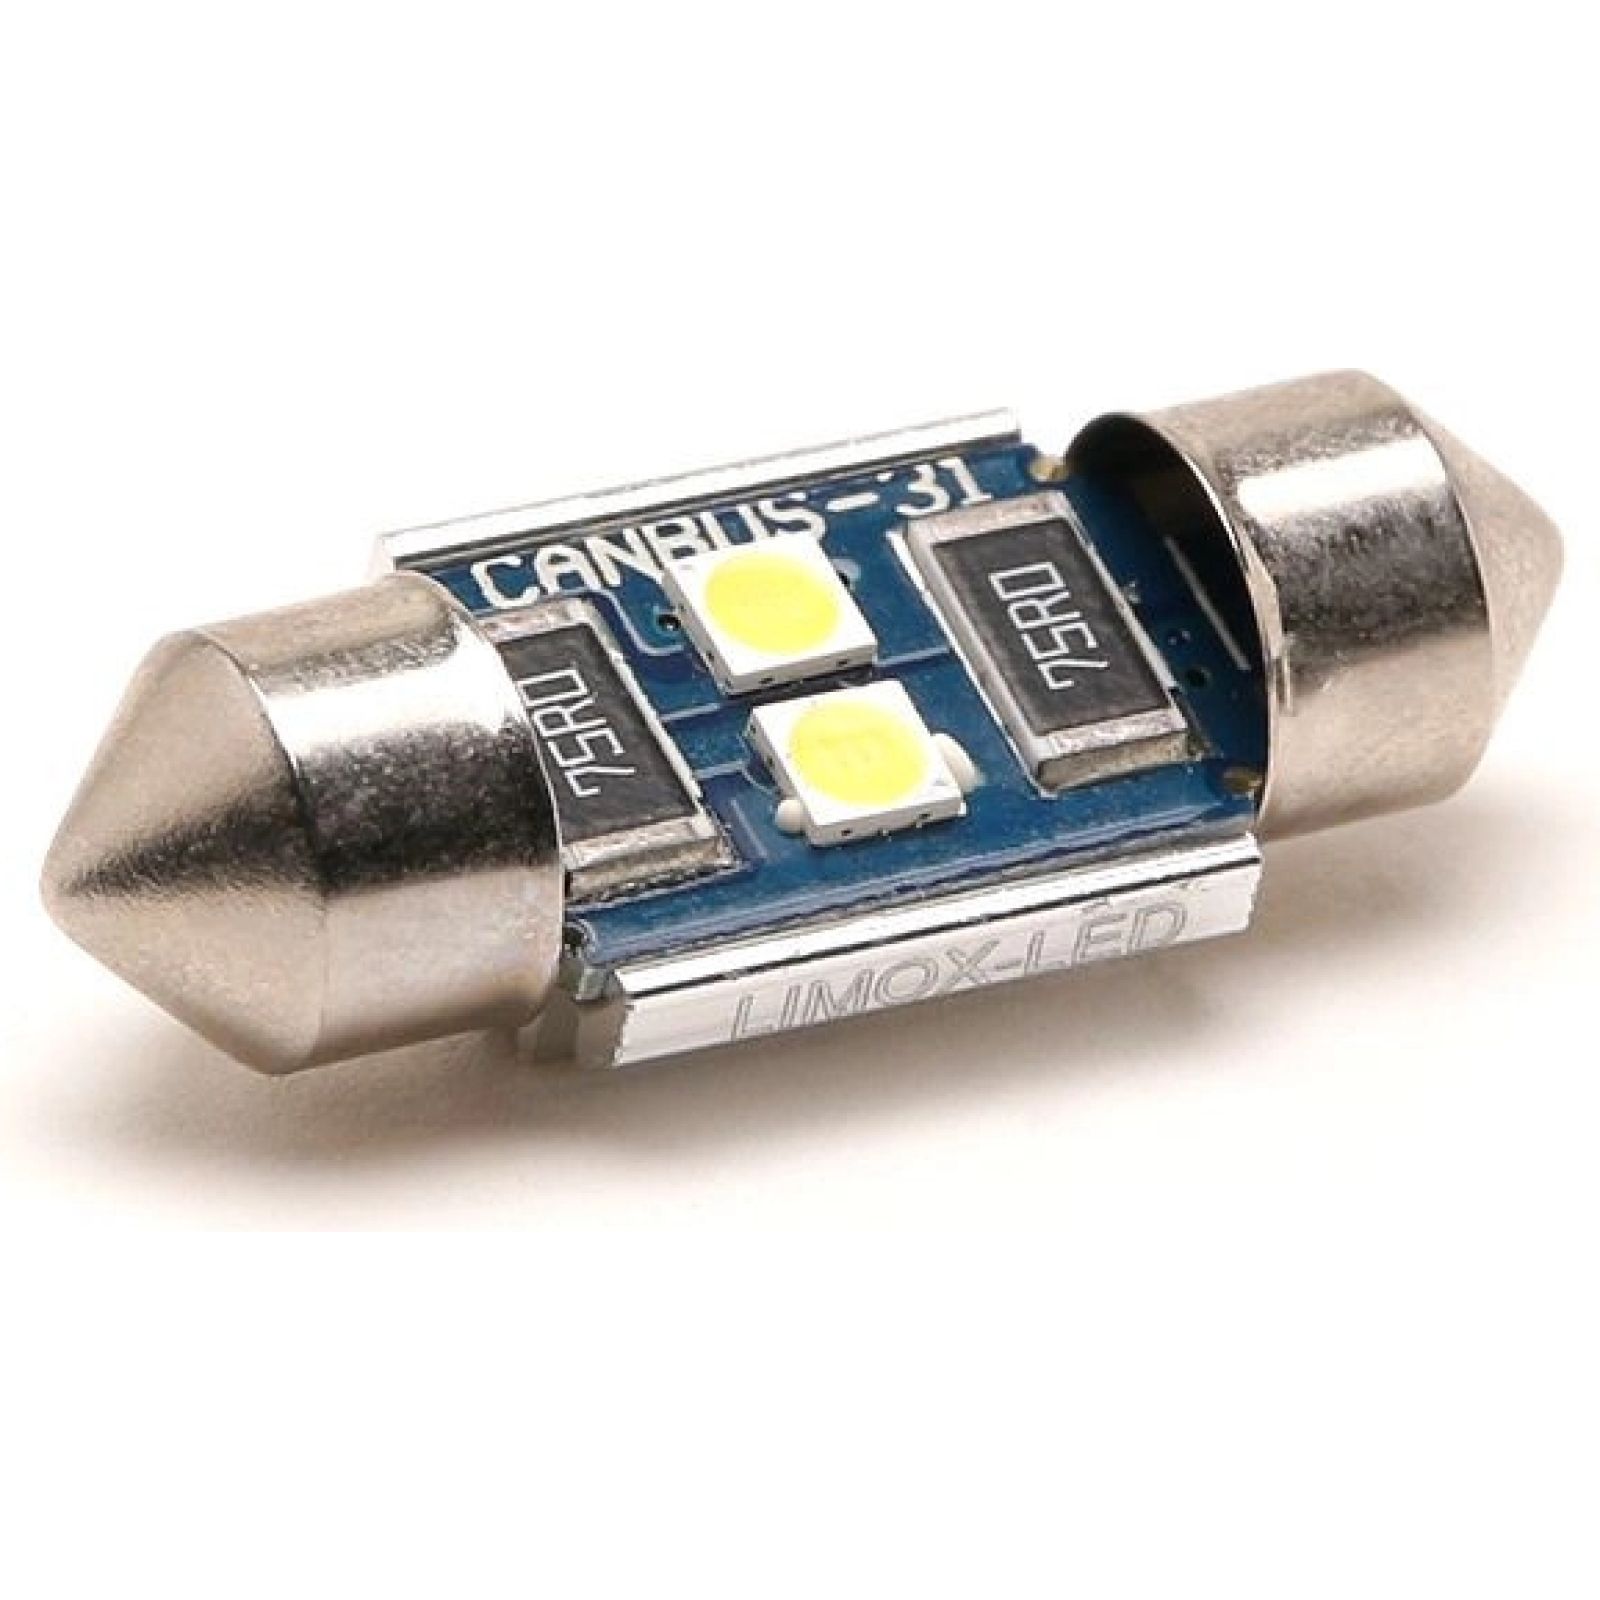 https://www.autoteile-store.at/img/product/led-soffitte-c5w-31mm-2x-3030-smd-weiss-250-lumen-canbus-2-stueck-24553-328042/fea617754ca8fc269c53412bd1b57c49_1600.jpg